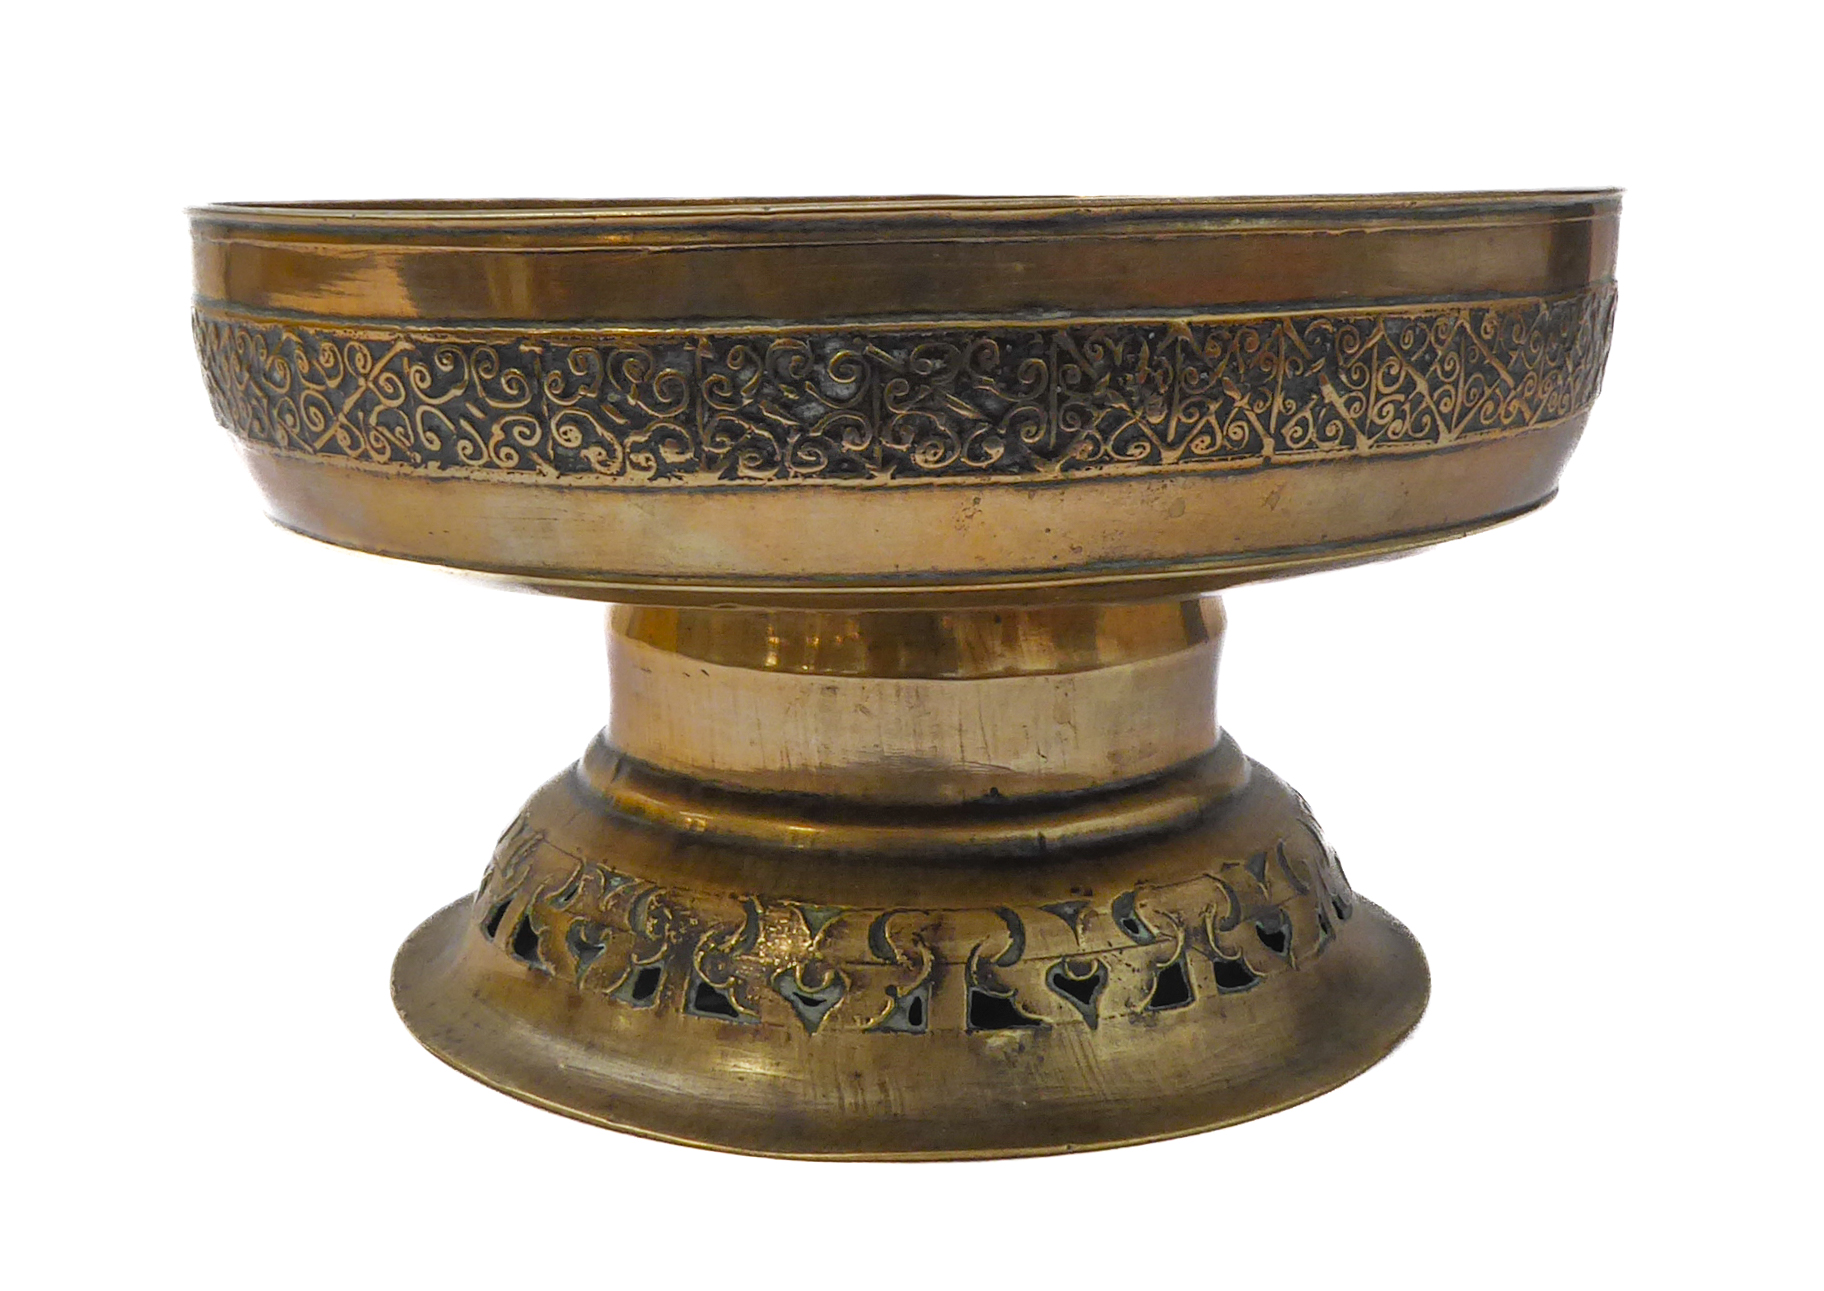 A Chinese brass footed bowl with repoussé banded decoration and pierced foot rim. (A/F) (rim